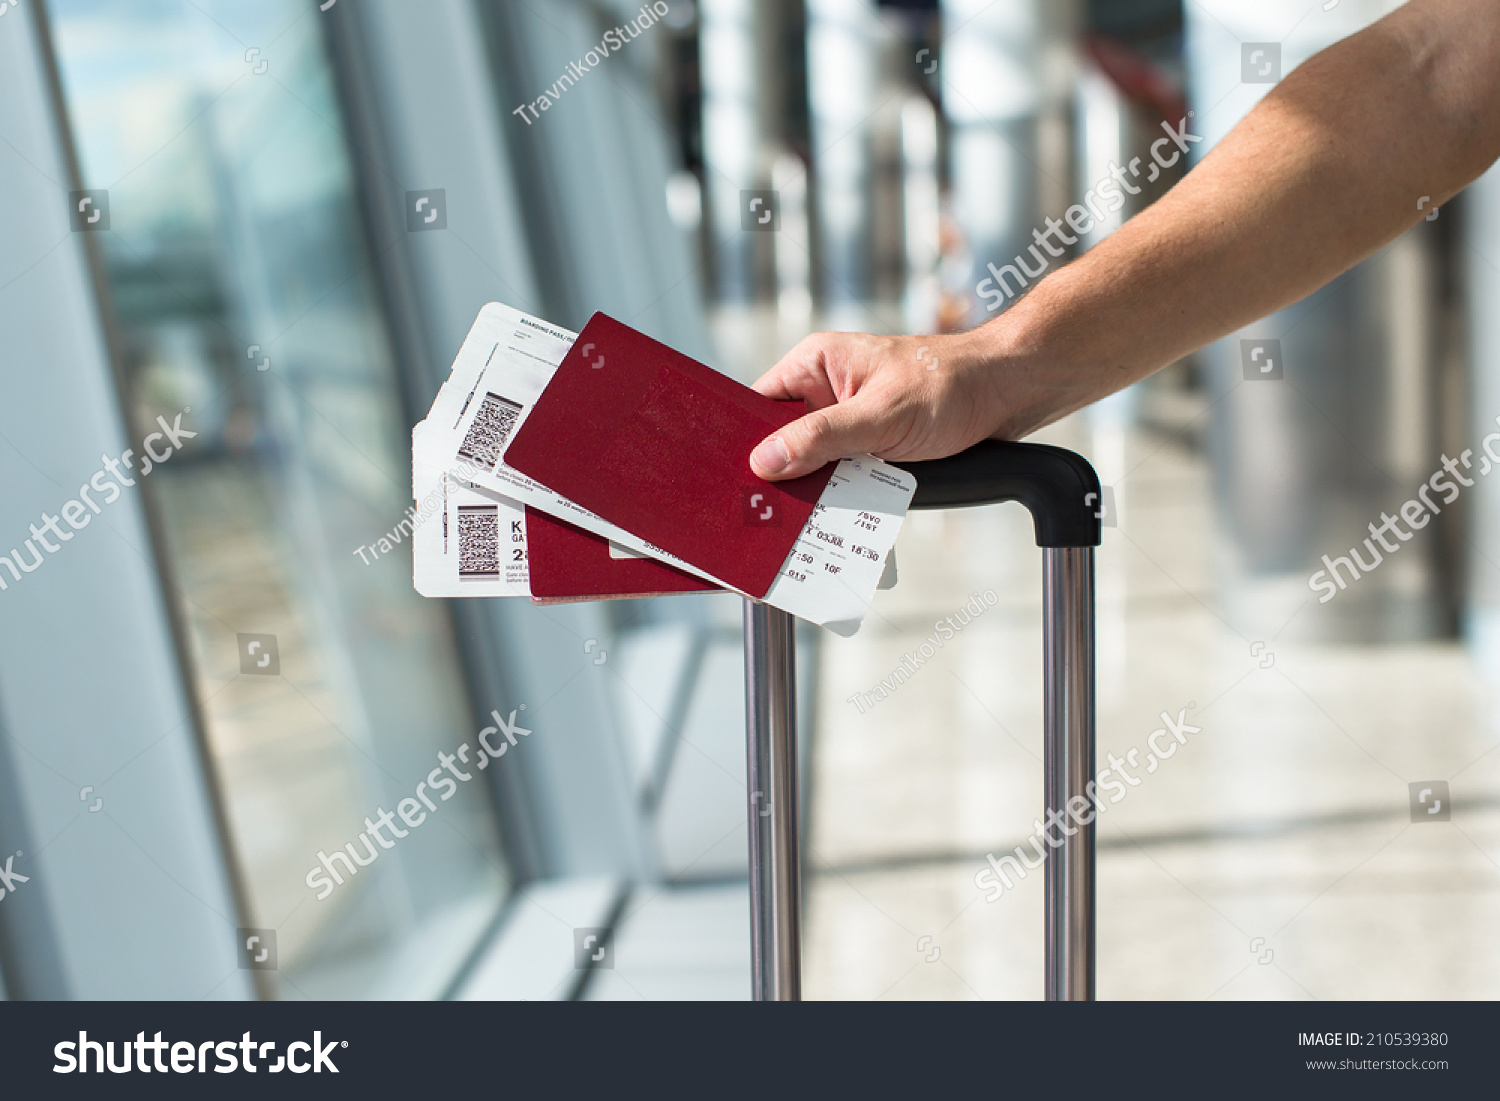 Closeup of man holding passports and boarding pass at airport #210539380